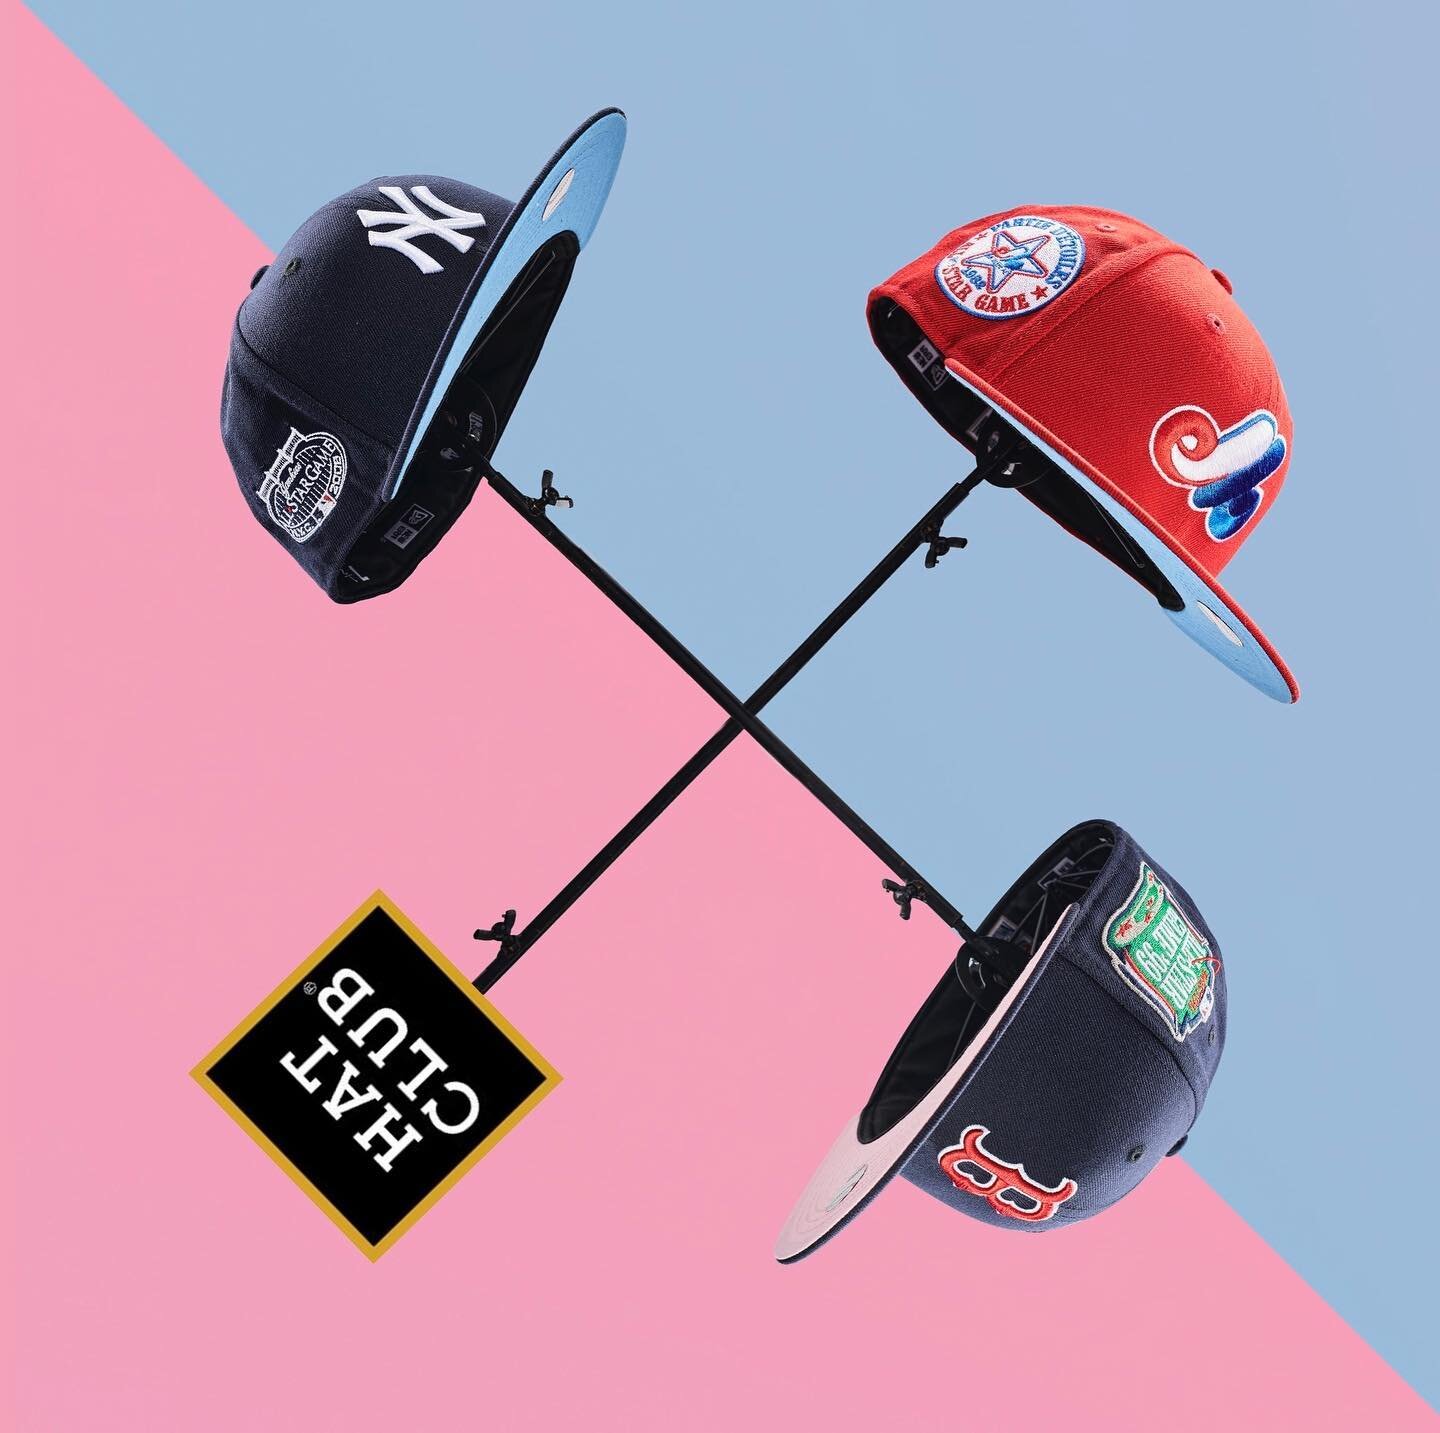 ❄️&iexcl;Blizzard &amp; PNKY alert! ❄️ YOO NE 5950 friends I wanted to remind y&rsquo;all to PREORDER your #allstargame #mlb #icy &amp; #pinkbottom #5950s TODAY from @hatclub .com before the preorder ENDS at midnight PST tonight. DONT SLEEP. Same wit